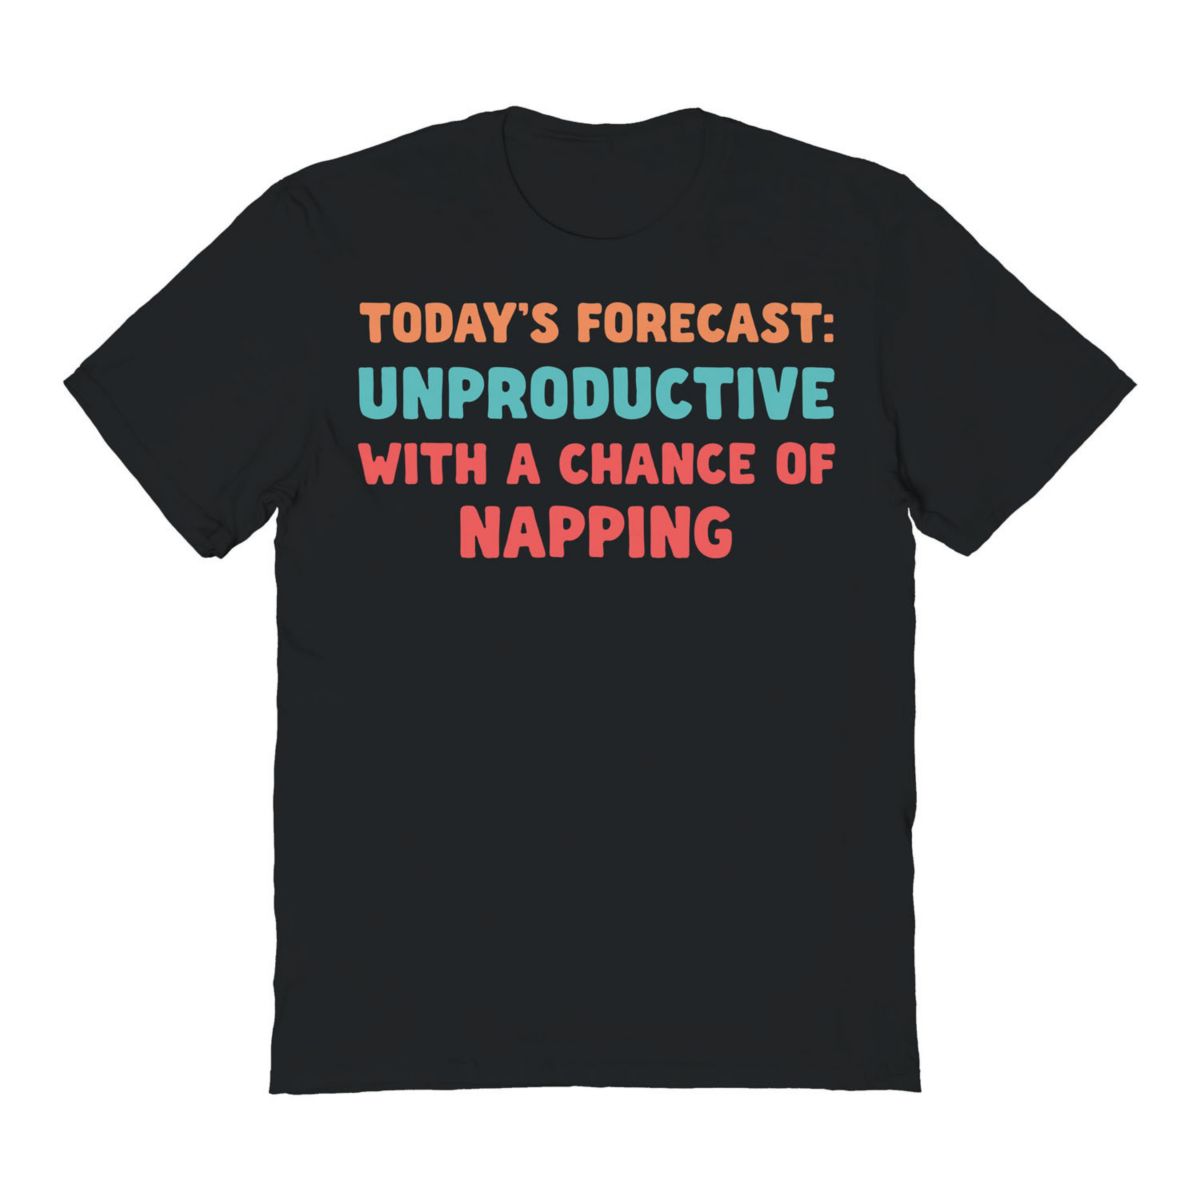 Men's COLAB89 by Threadless Todays Forecast Unproductive With Nap Graphic Tee COLAB89 by Threadless